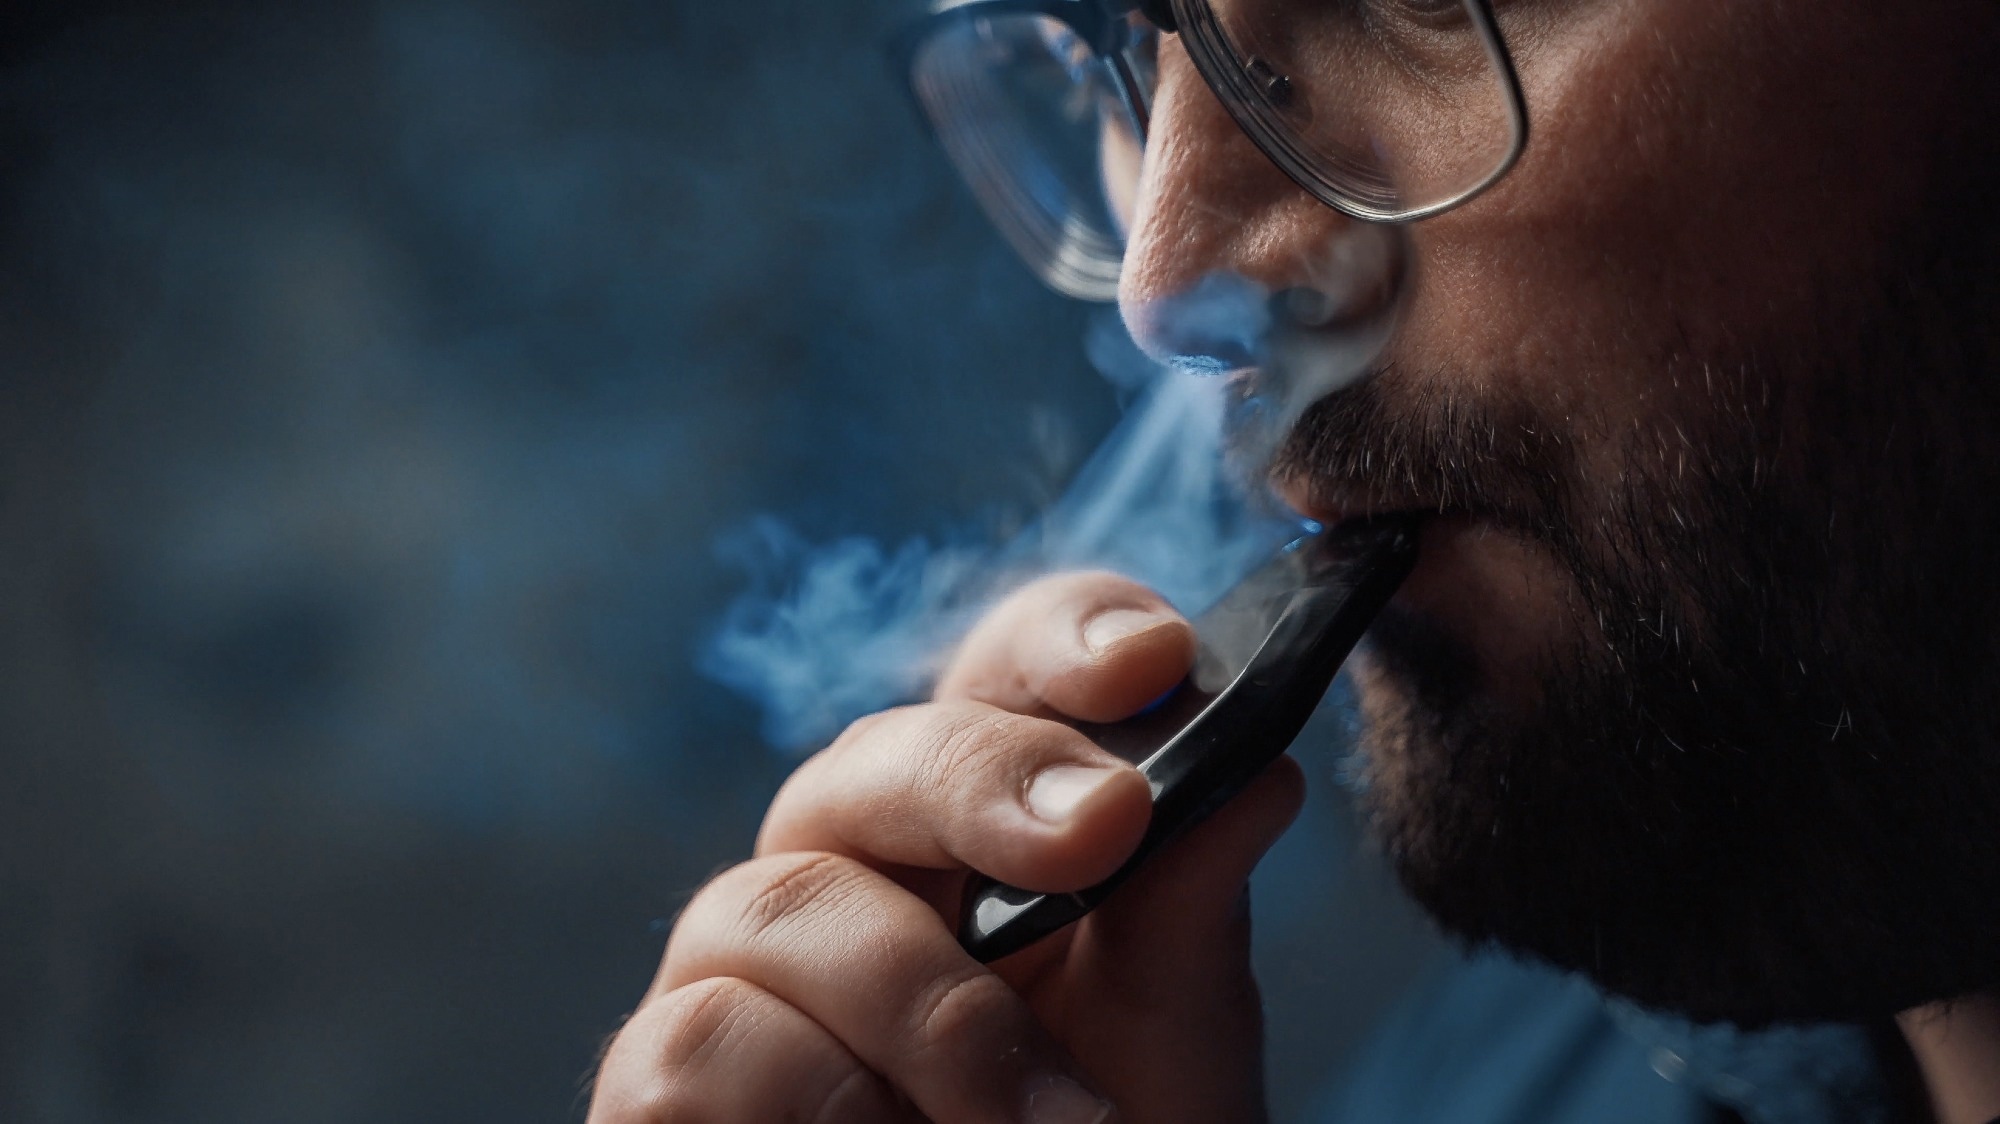 Study: Does Vaping Increase the Likelihood of SARS-CoV-2 Infection? Paradoxically Yes and No. Image Credit: DedMityay / Shutterstock